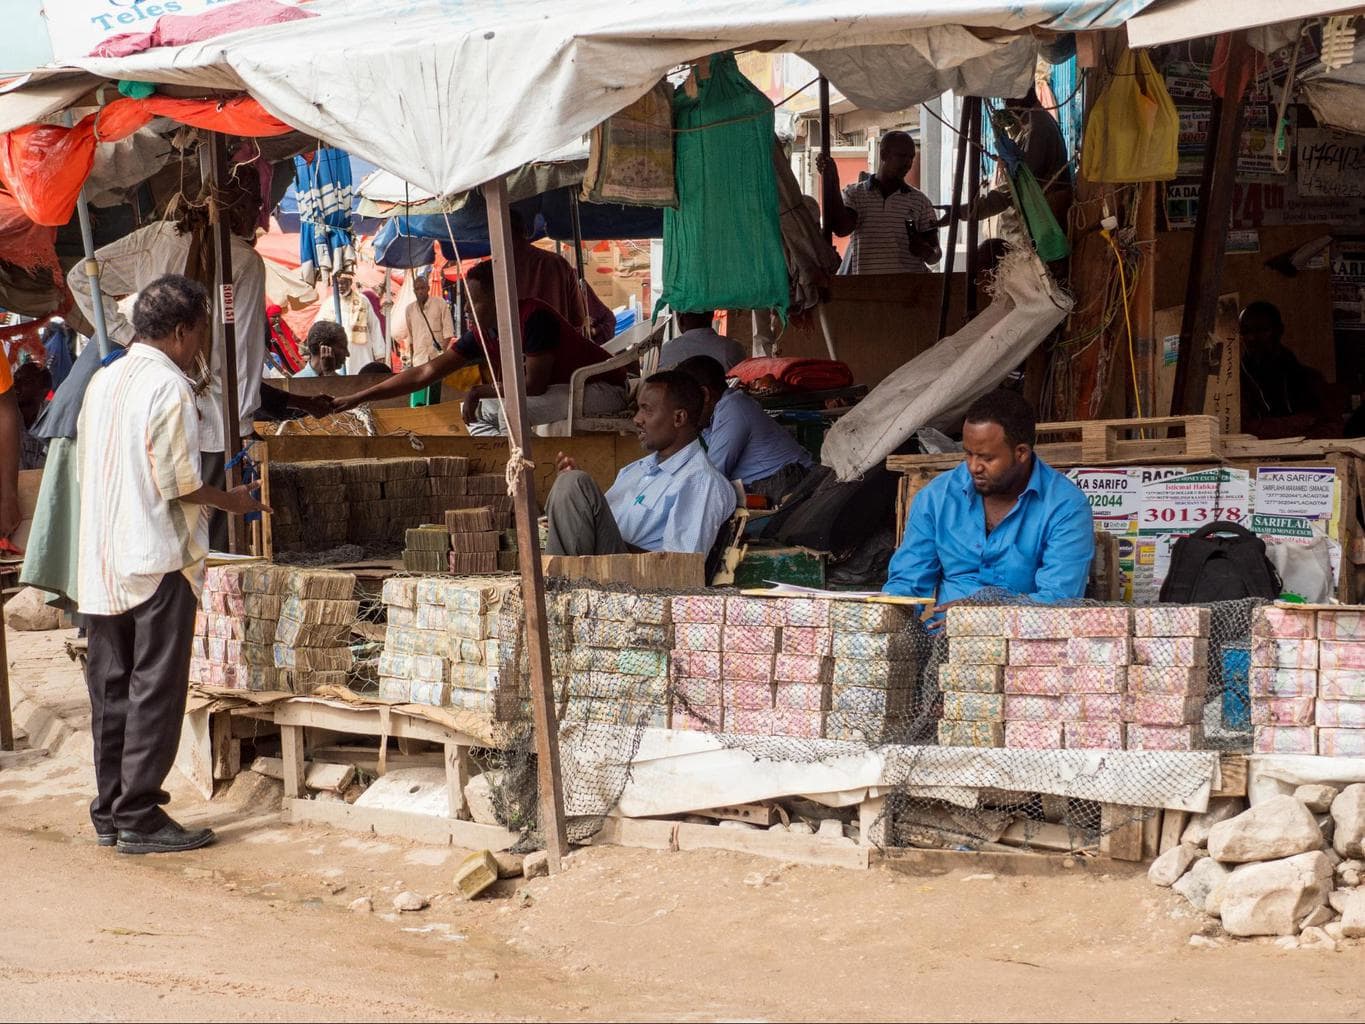 Money changers in the street of Hargeisa Central Market